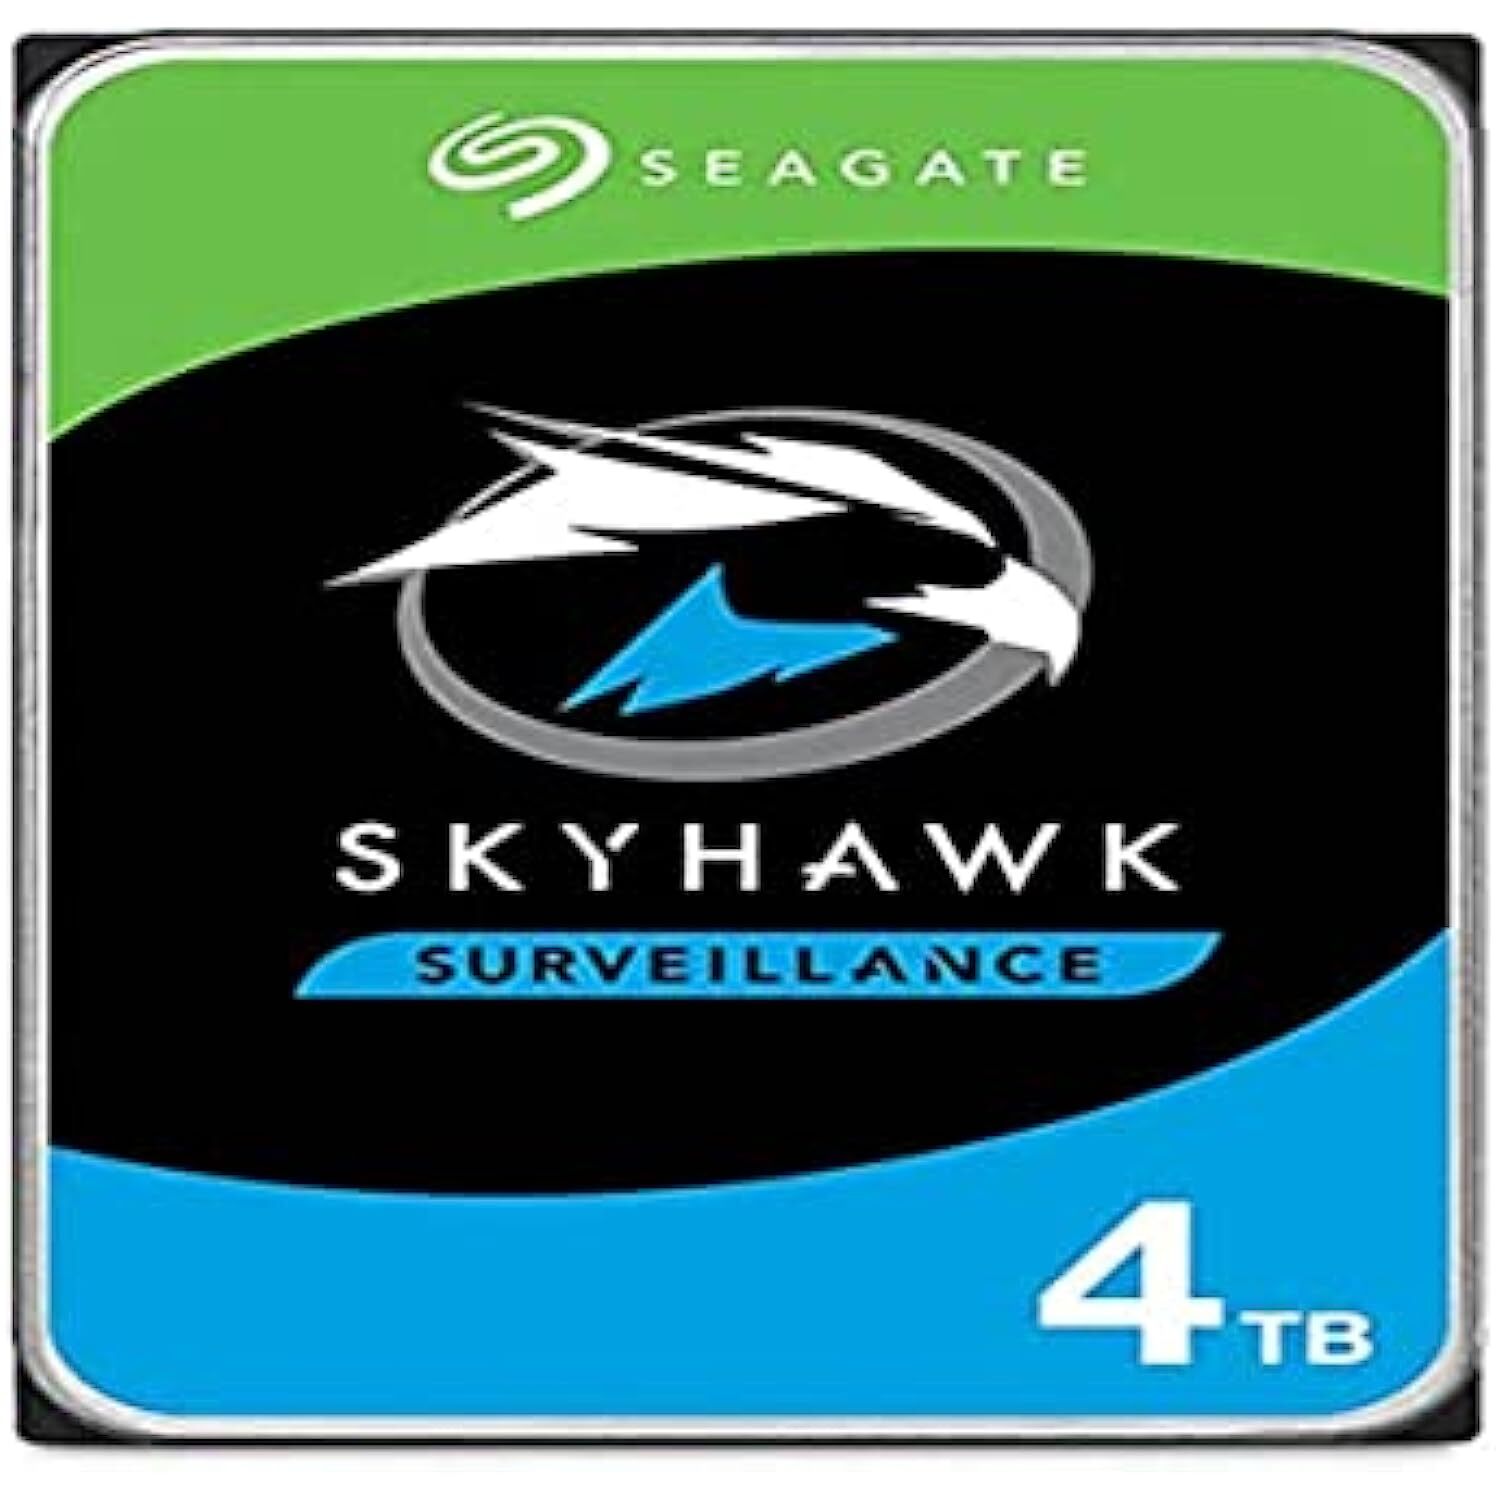 Seagate Skyhawk 4 TB Surveillance Internal Hard Drive HDD – 3.5 Inch Security Camera System with Drive Health Management, with 3 yr Rescue Data Recovery Services (ST4000VX013)